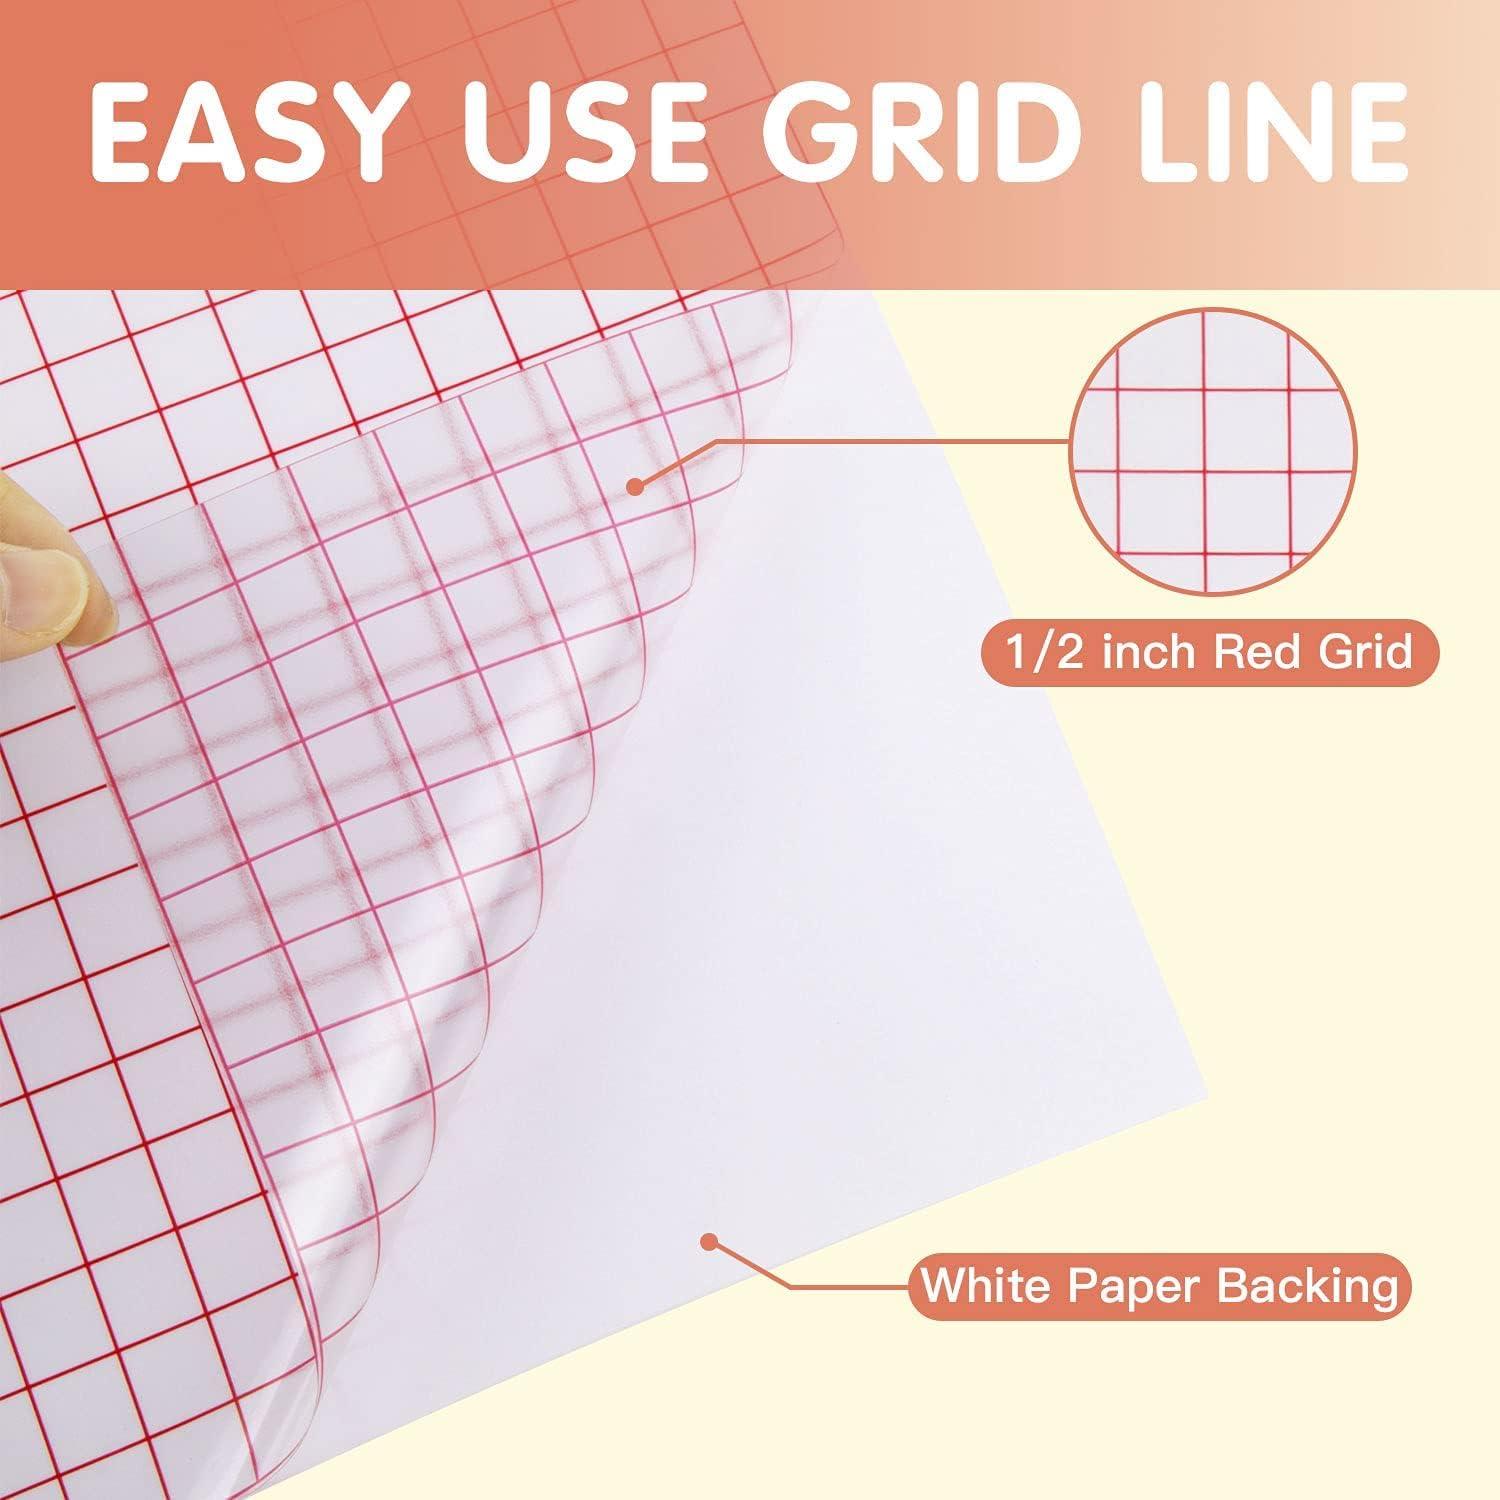 Adhesive PVC Transfer Vinyl Application Tape with Red Grid and